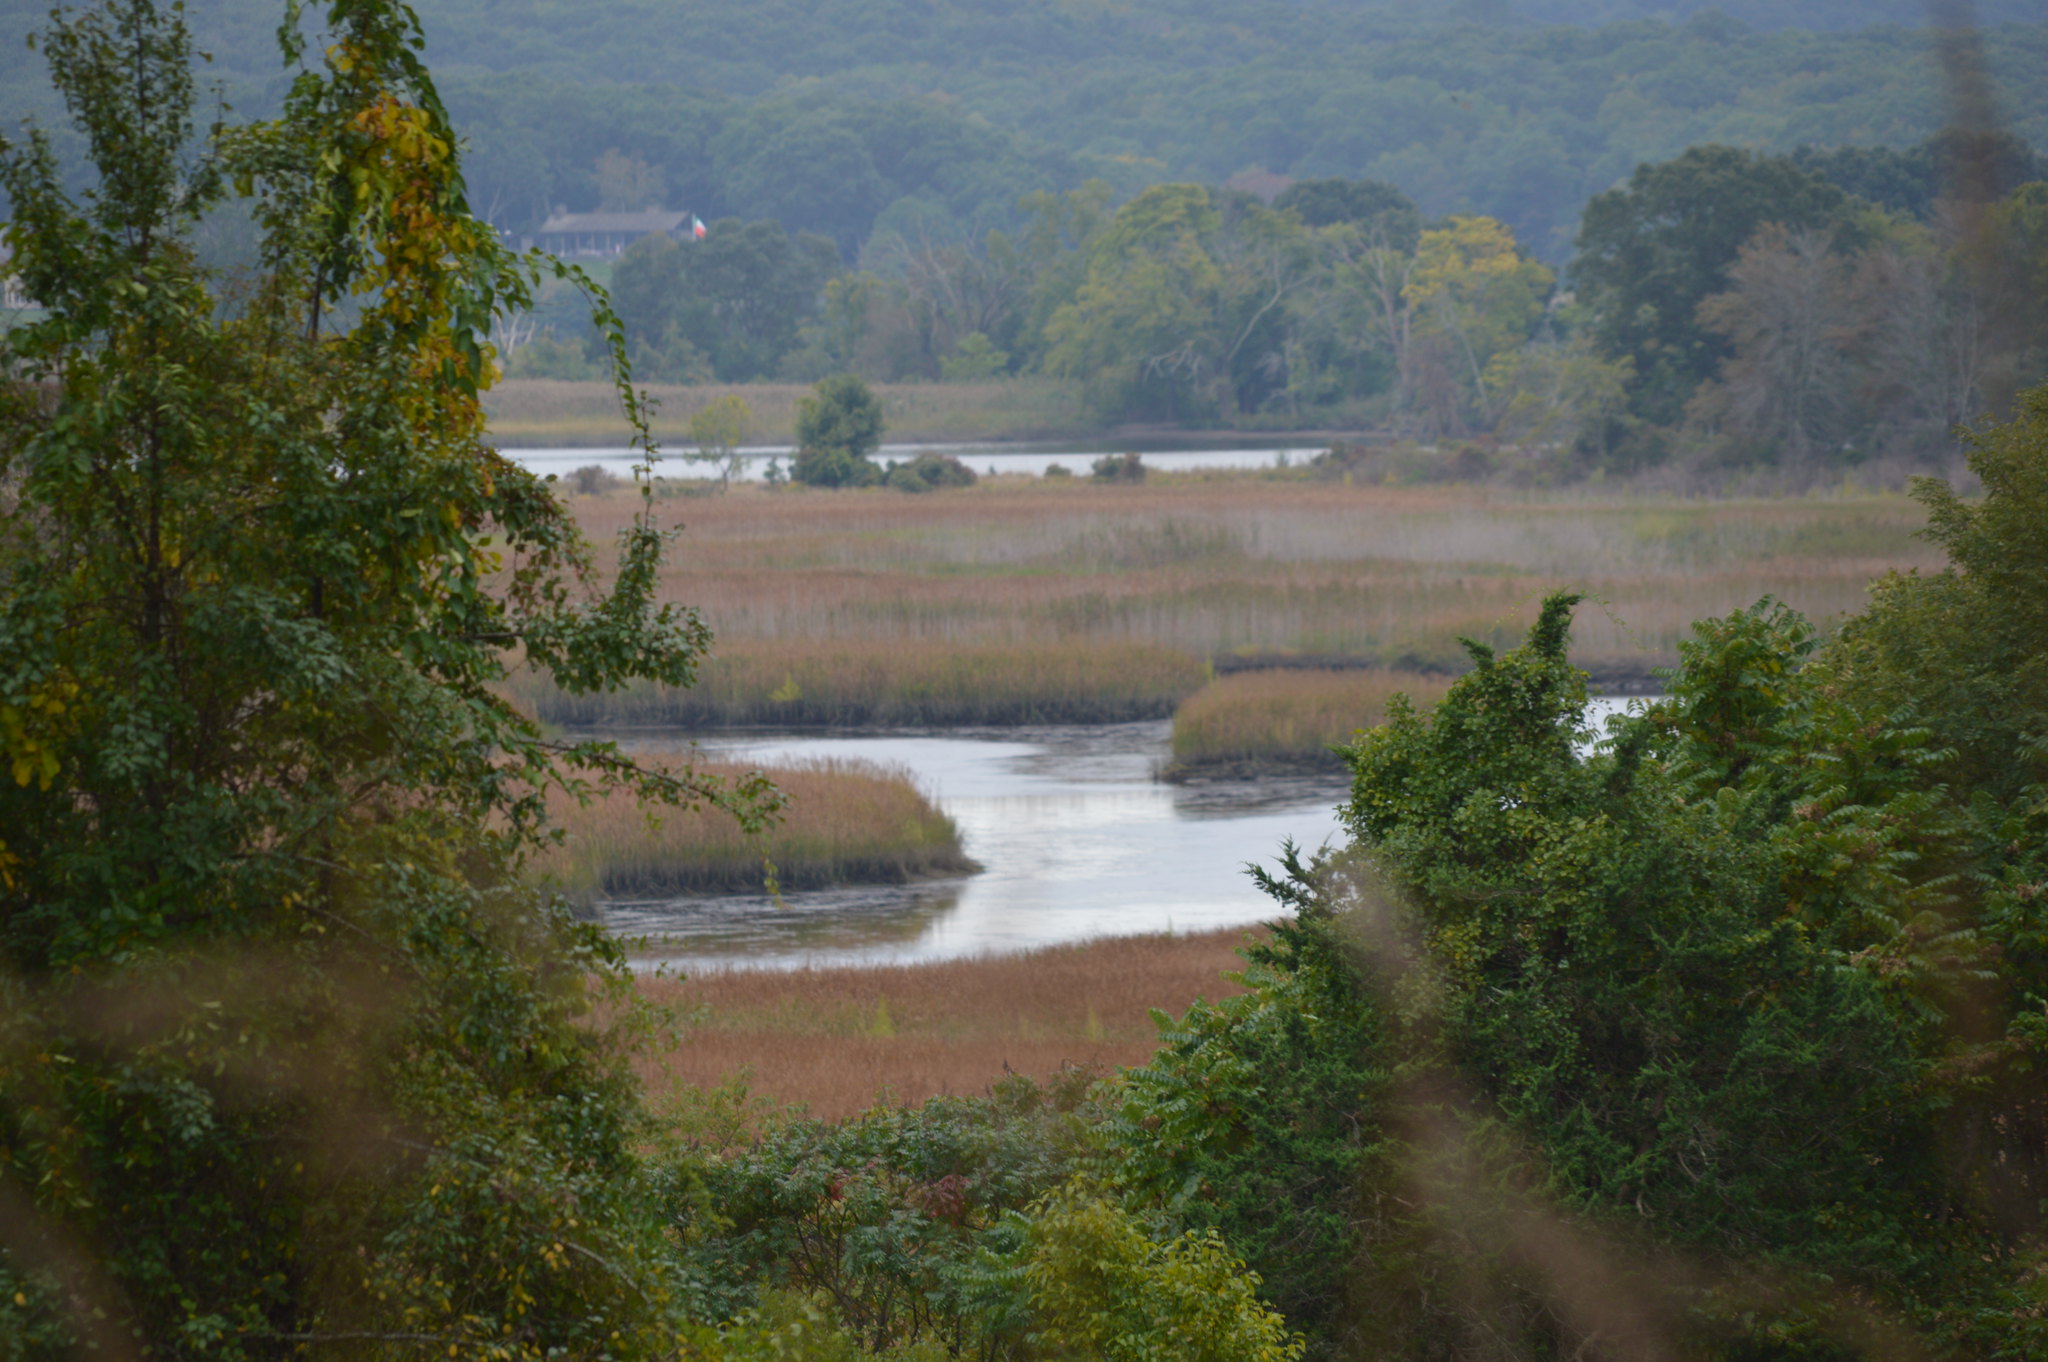 Image shows marshes, a winding waterway, trees, and a house in the distance.